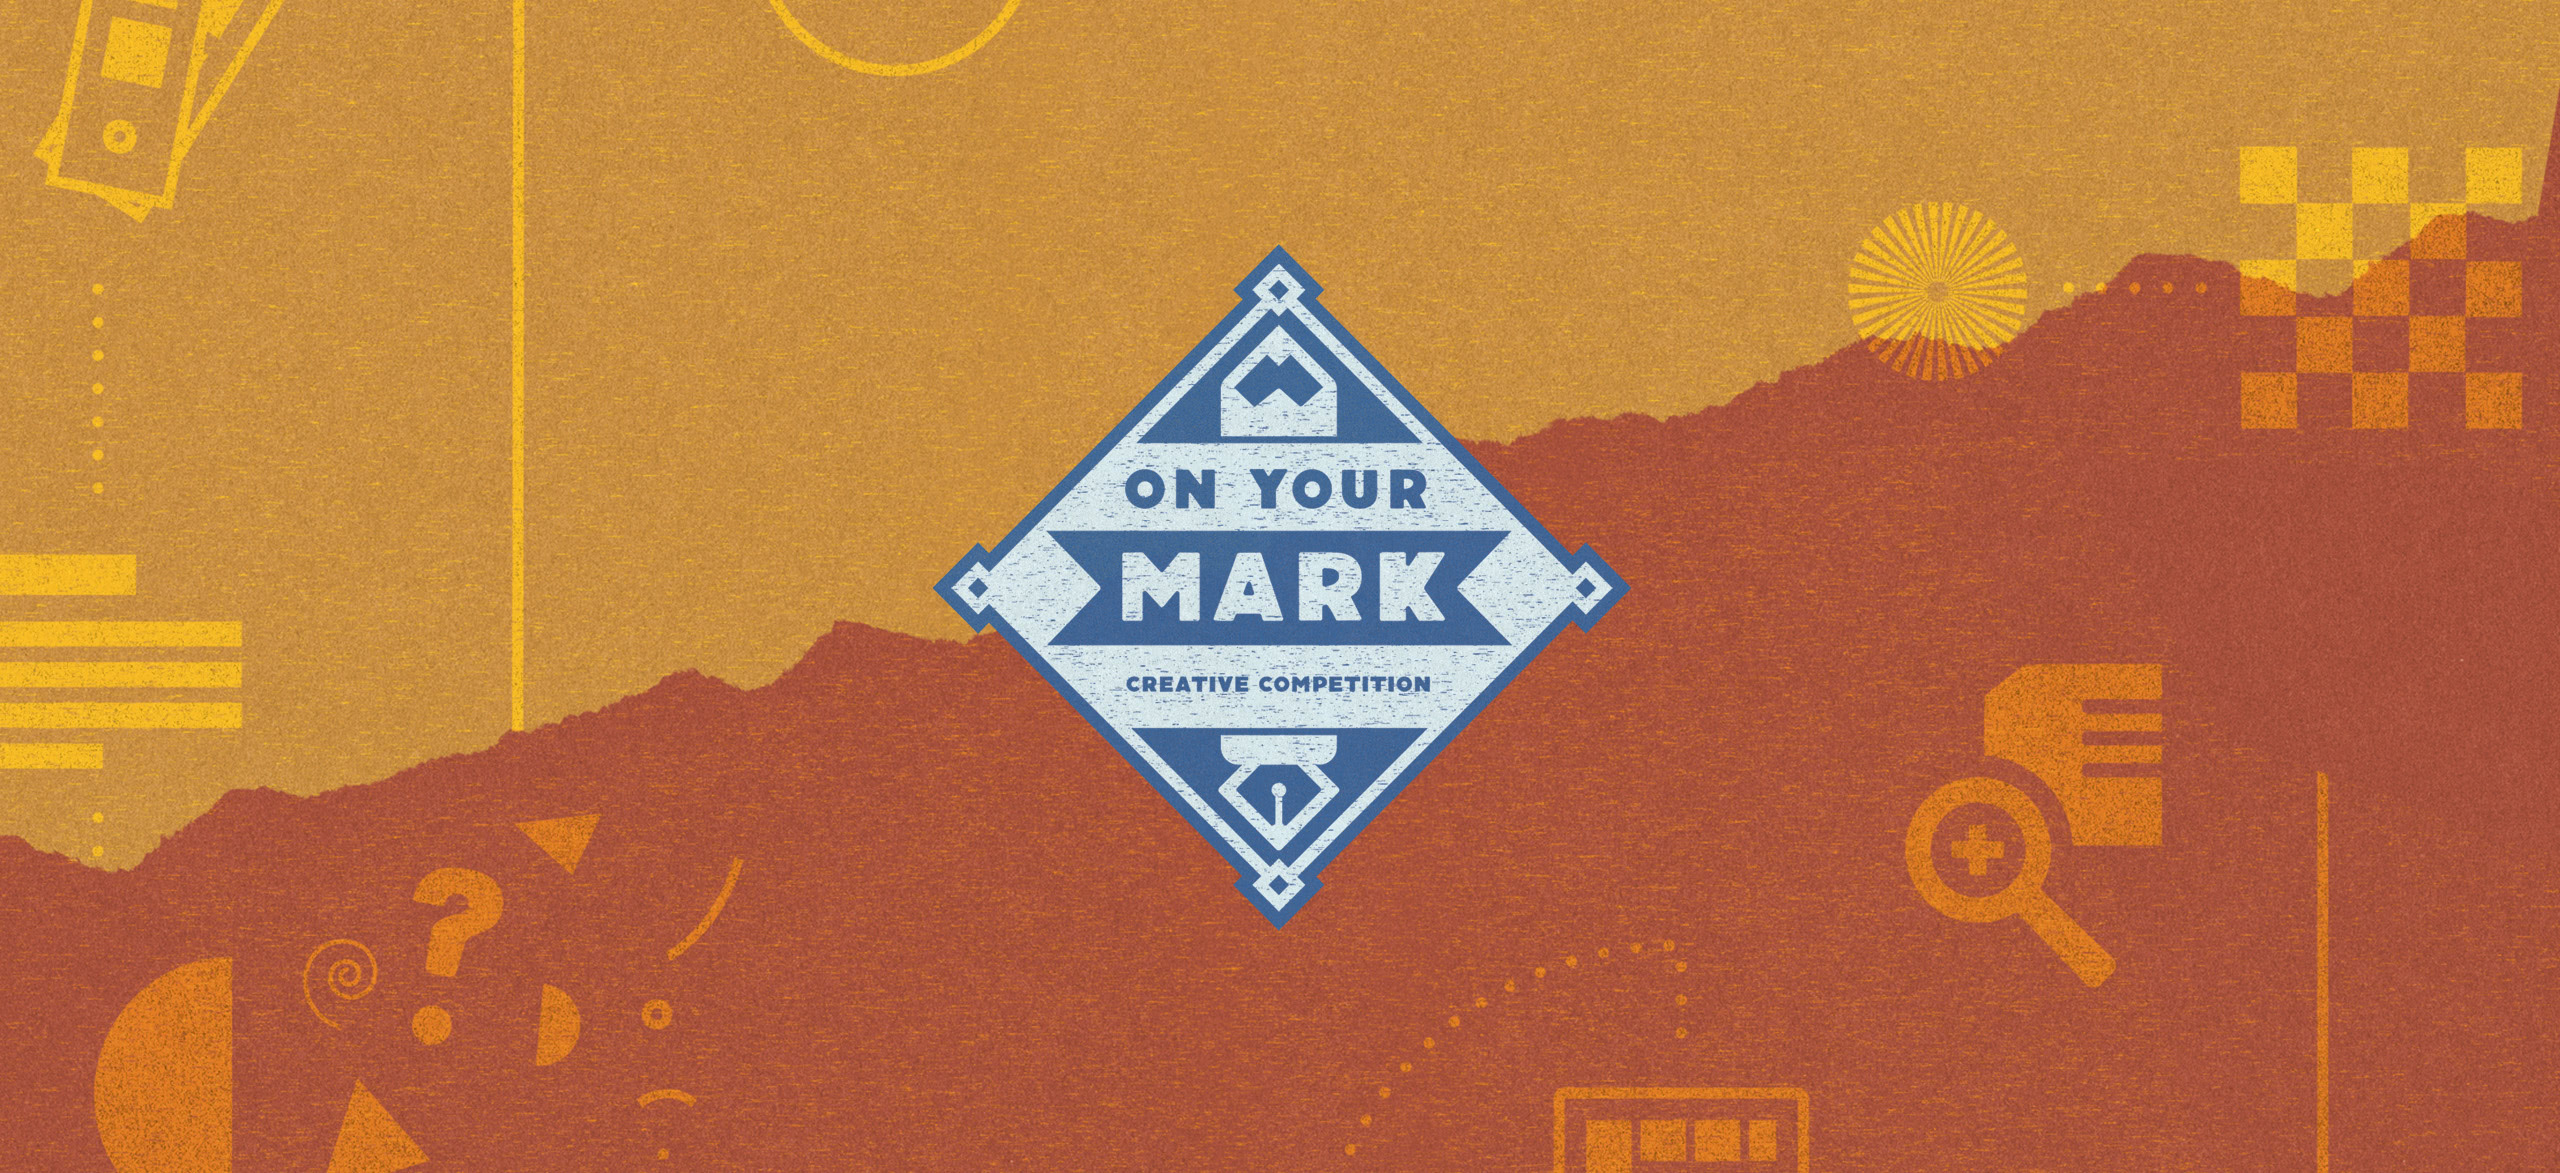 On Your Mark event logo